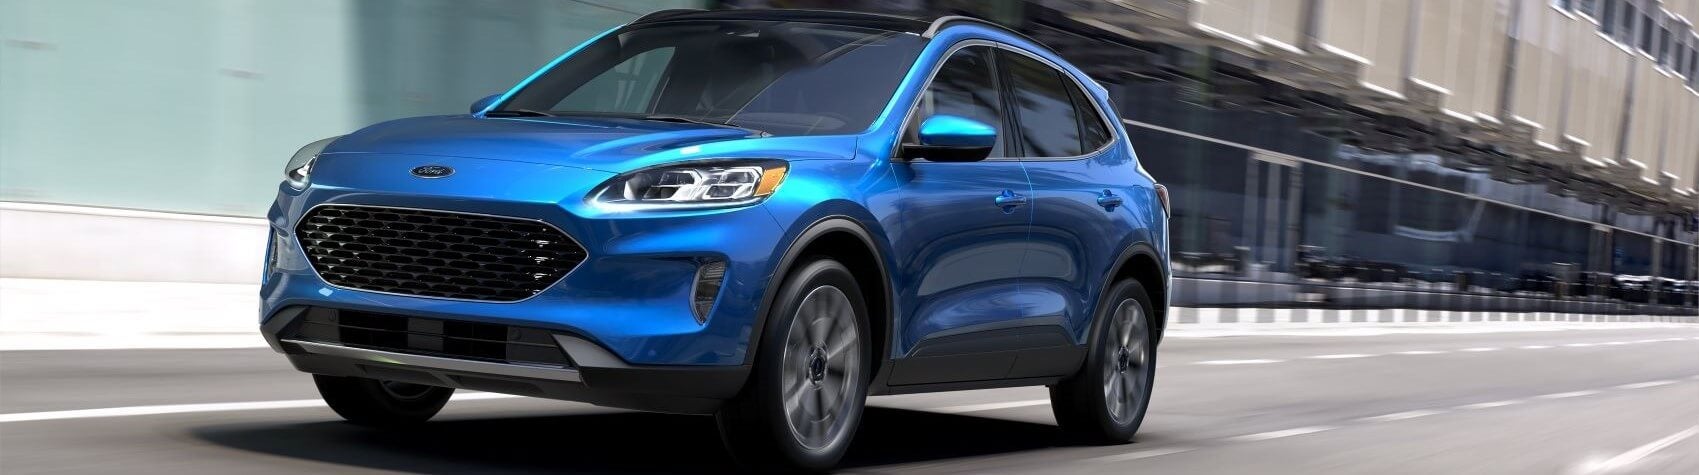 Ford Escape in Blue Snipped